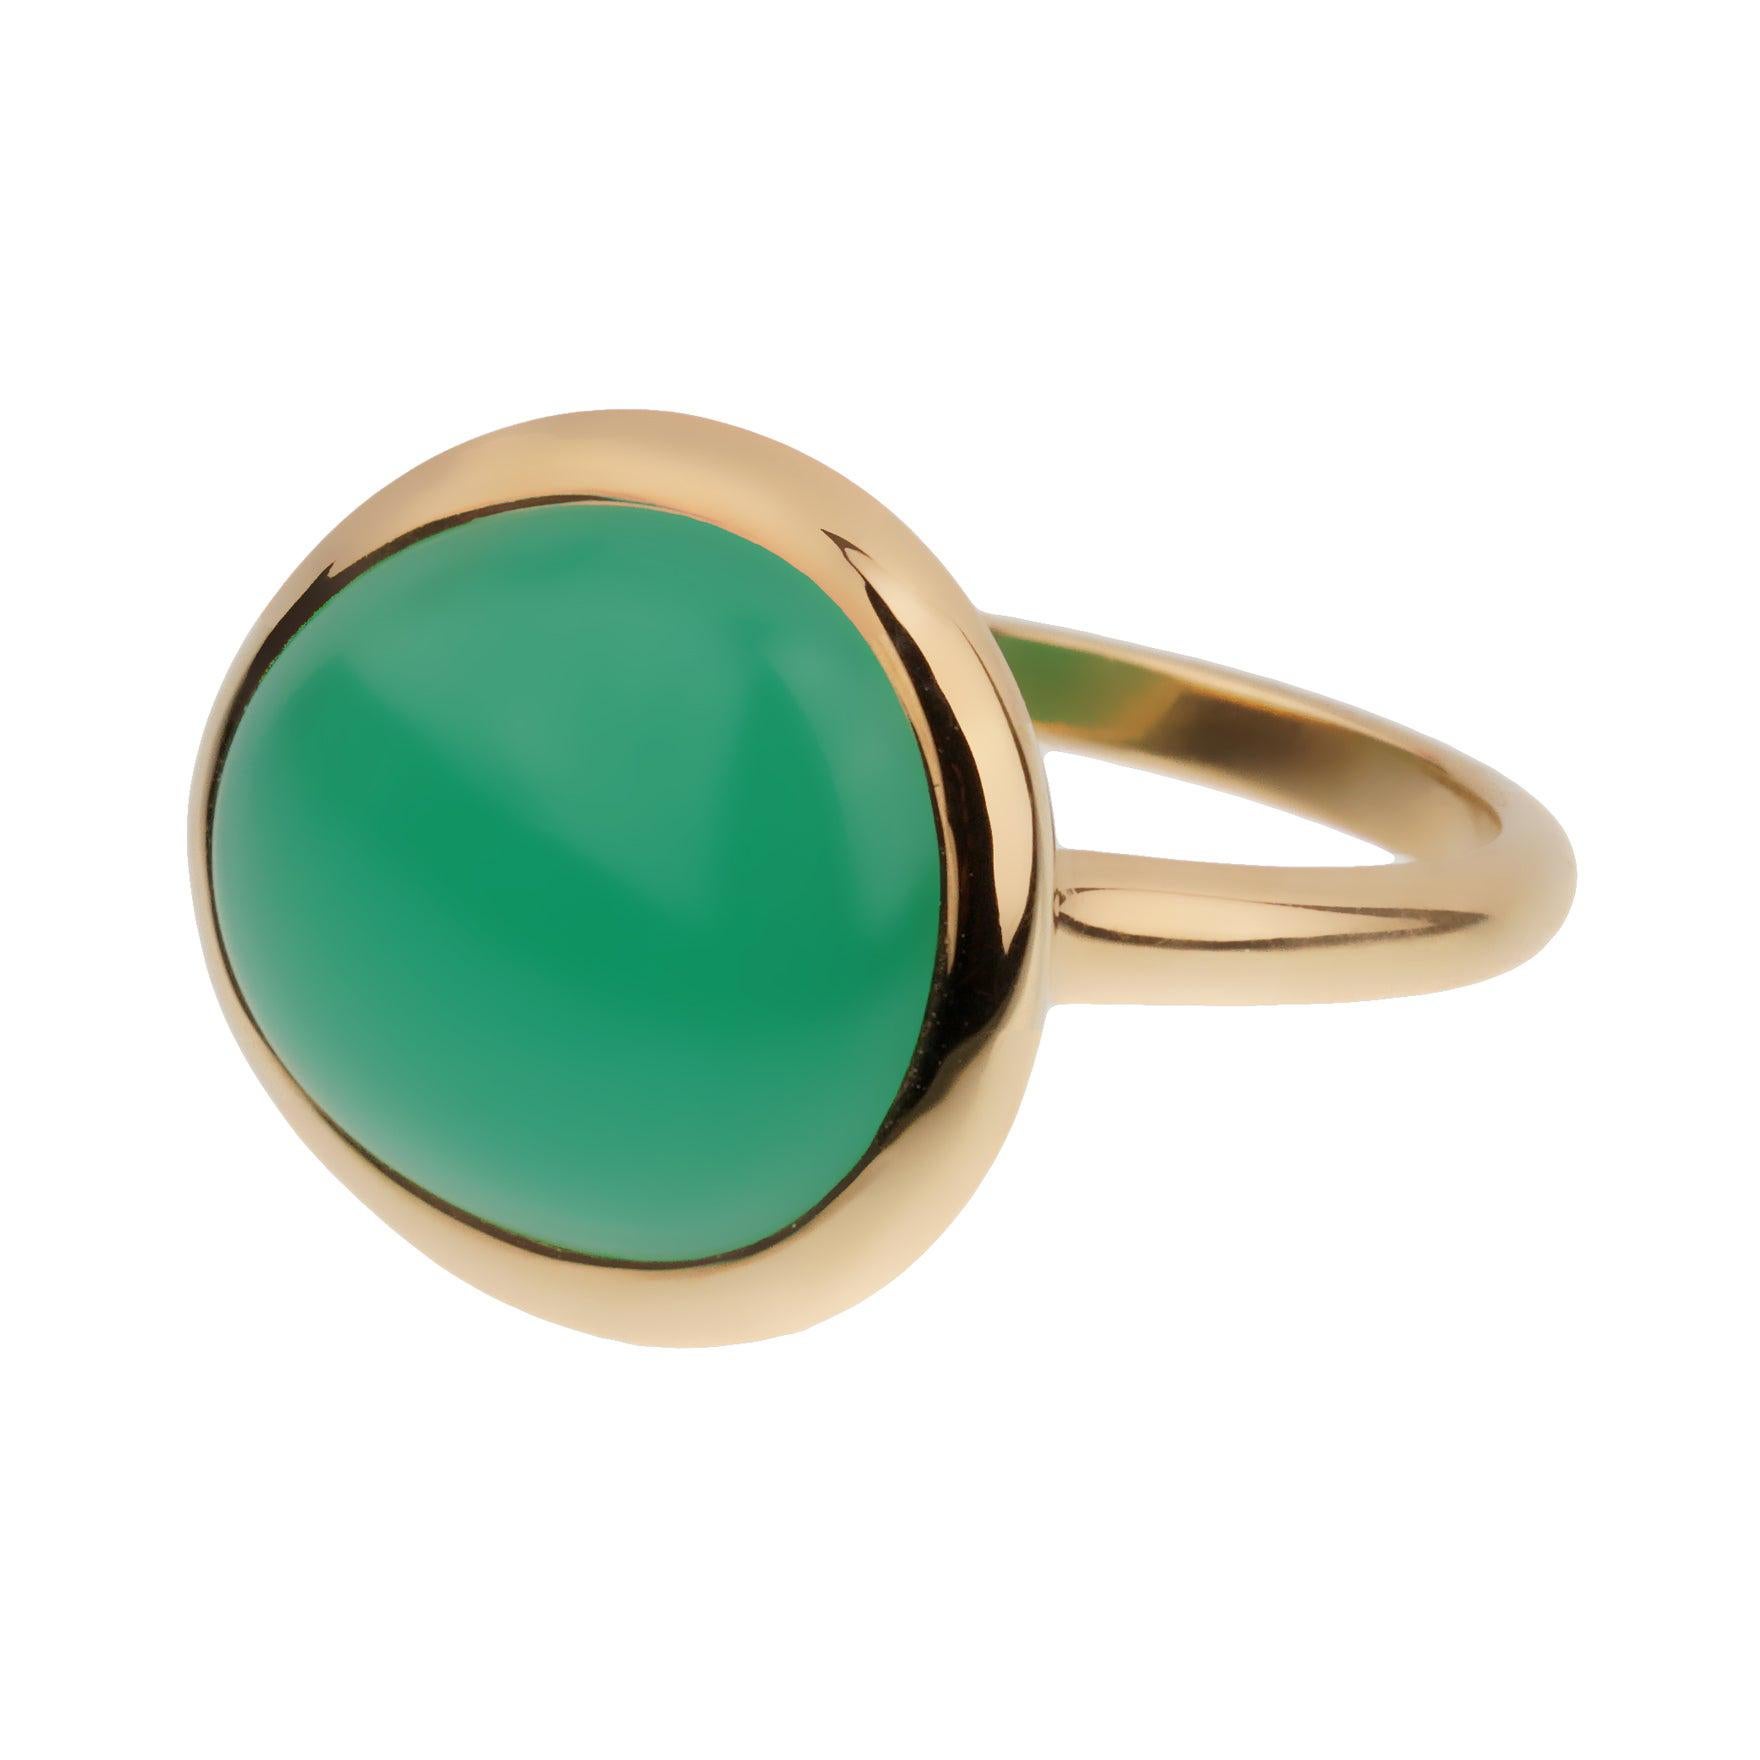 Fred of Paris 7ct Chrysophase Cabochon Yellow Gold Cocktail Ring For Sale